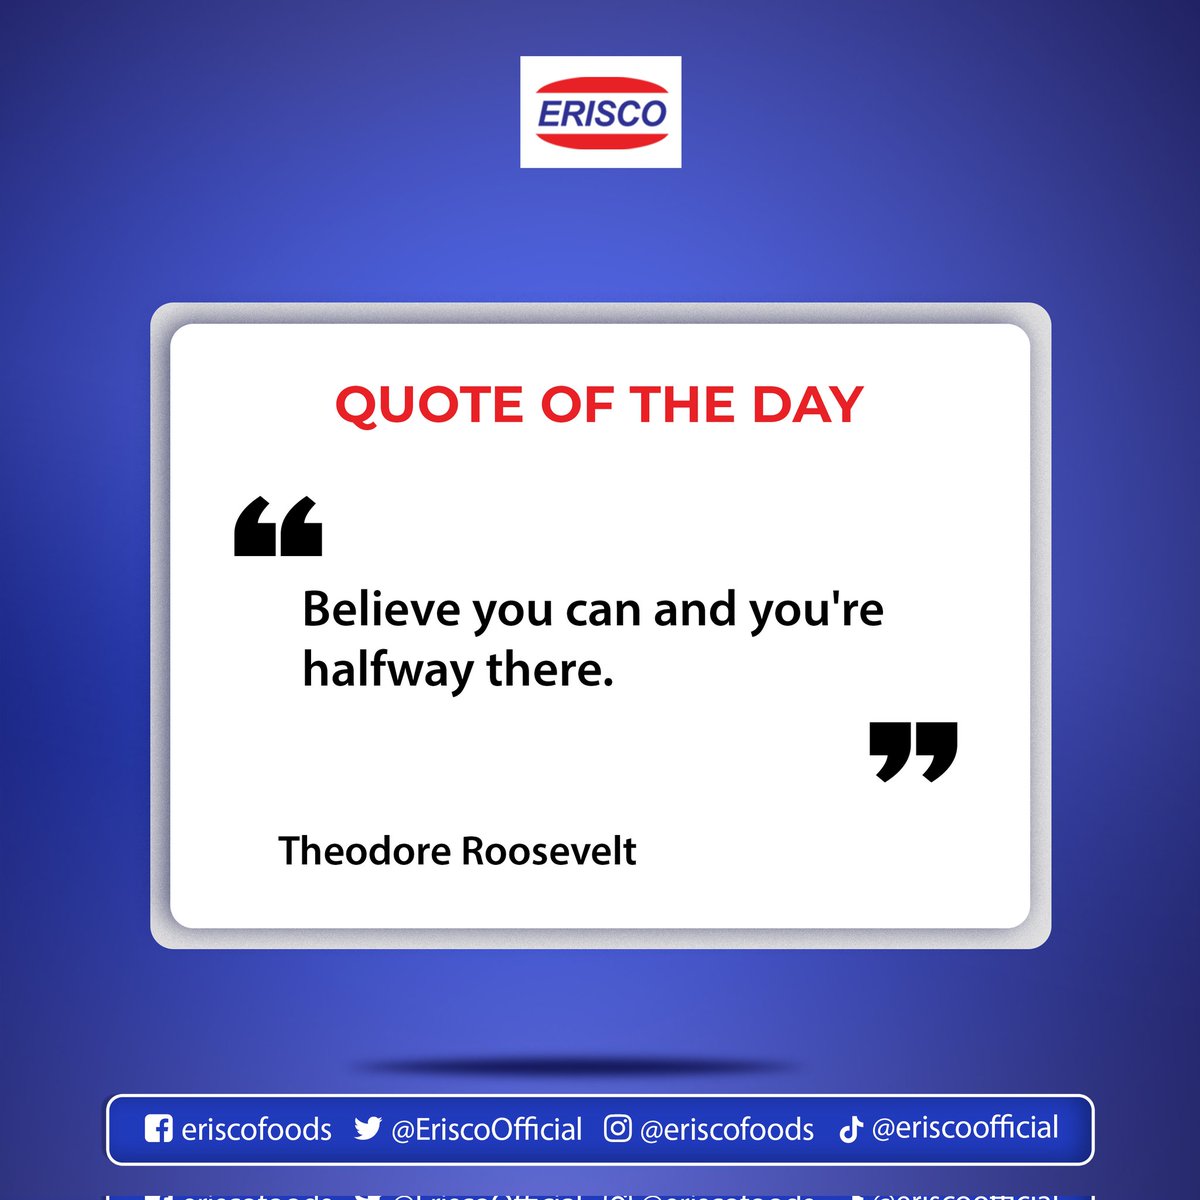 Hello Erisco Community! 

Today's quote emphasizes the importance of believing in your ability to achieve your goals.: 

'Believe you can and you're halfway there.' 
- Theodore Roosevelt

#eriscomornings #EriscoFoods #dailymotivation